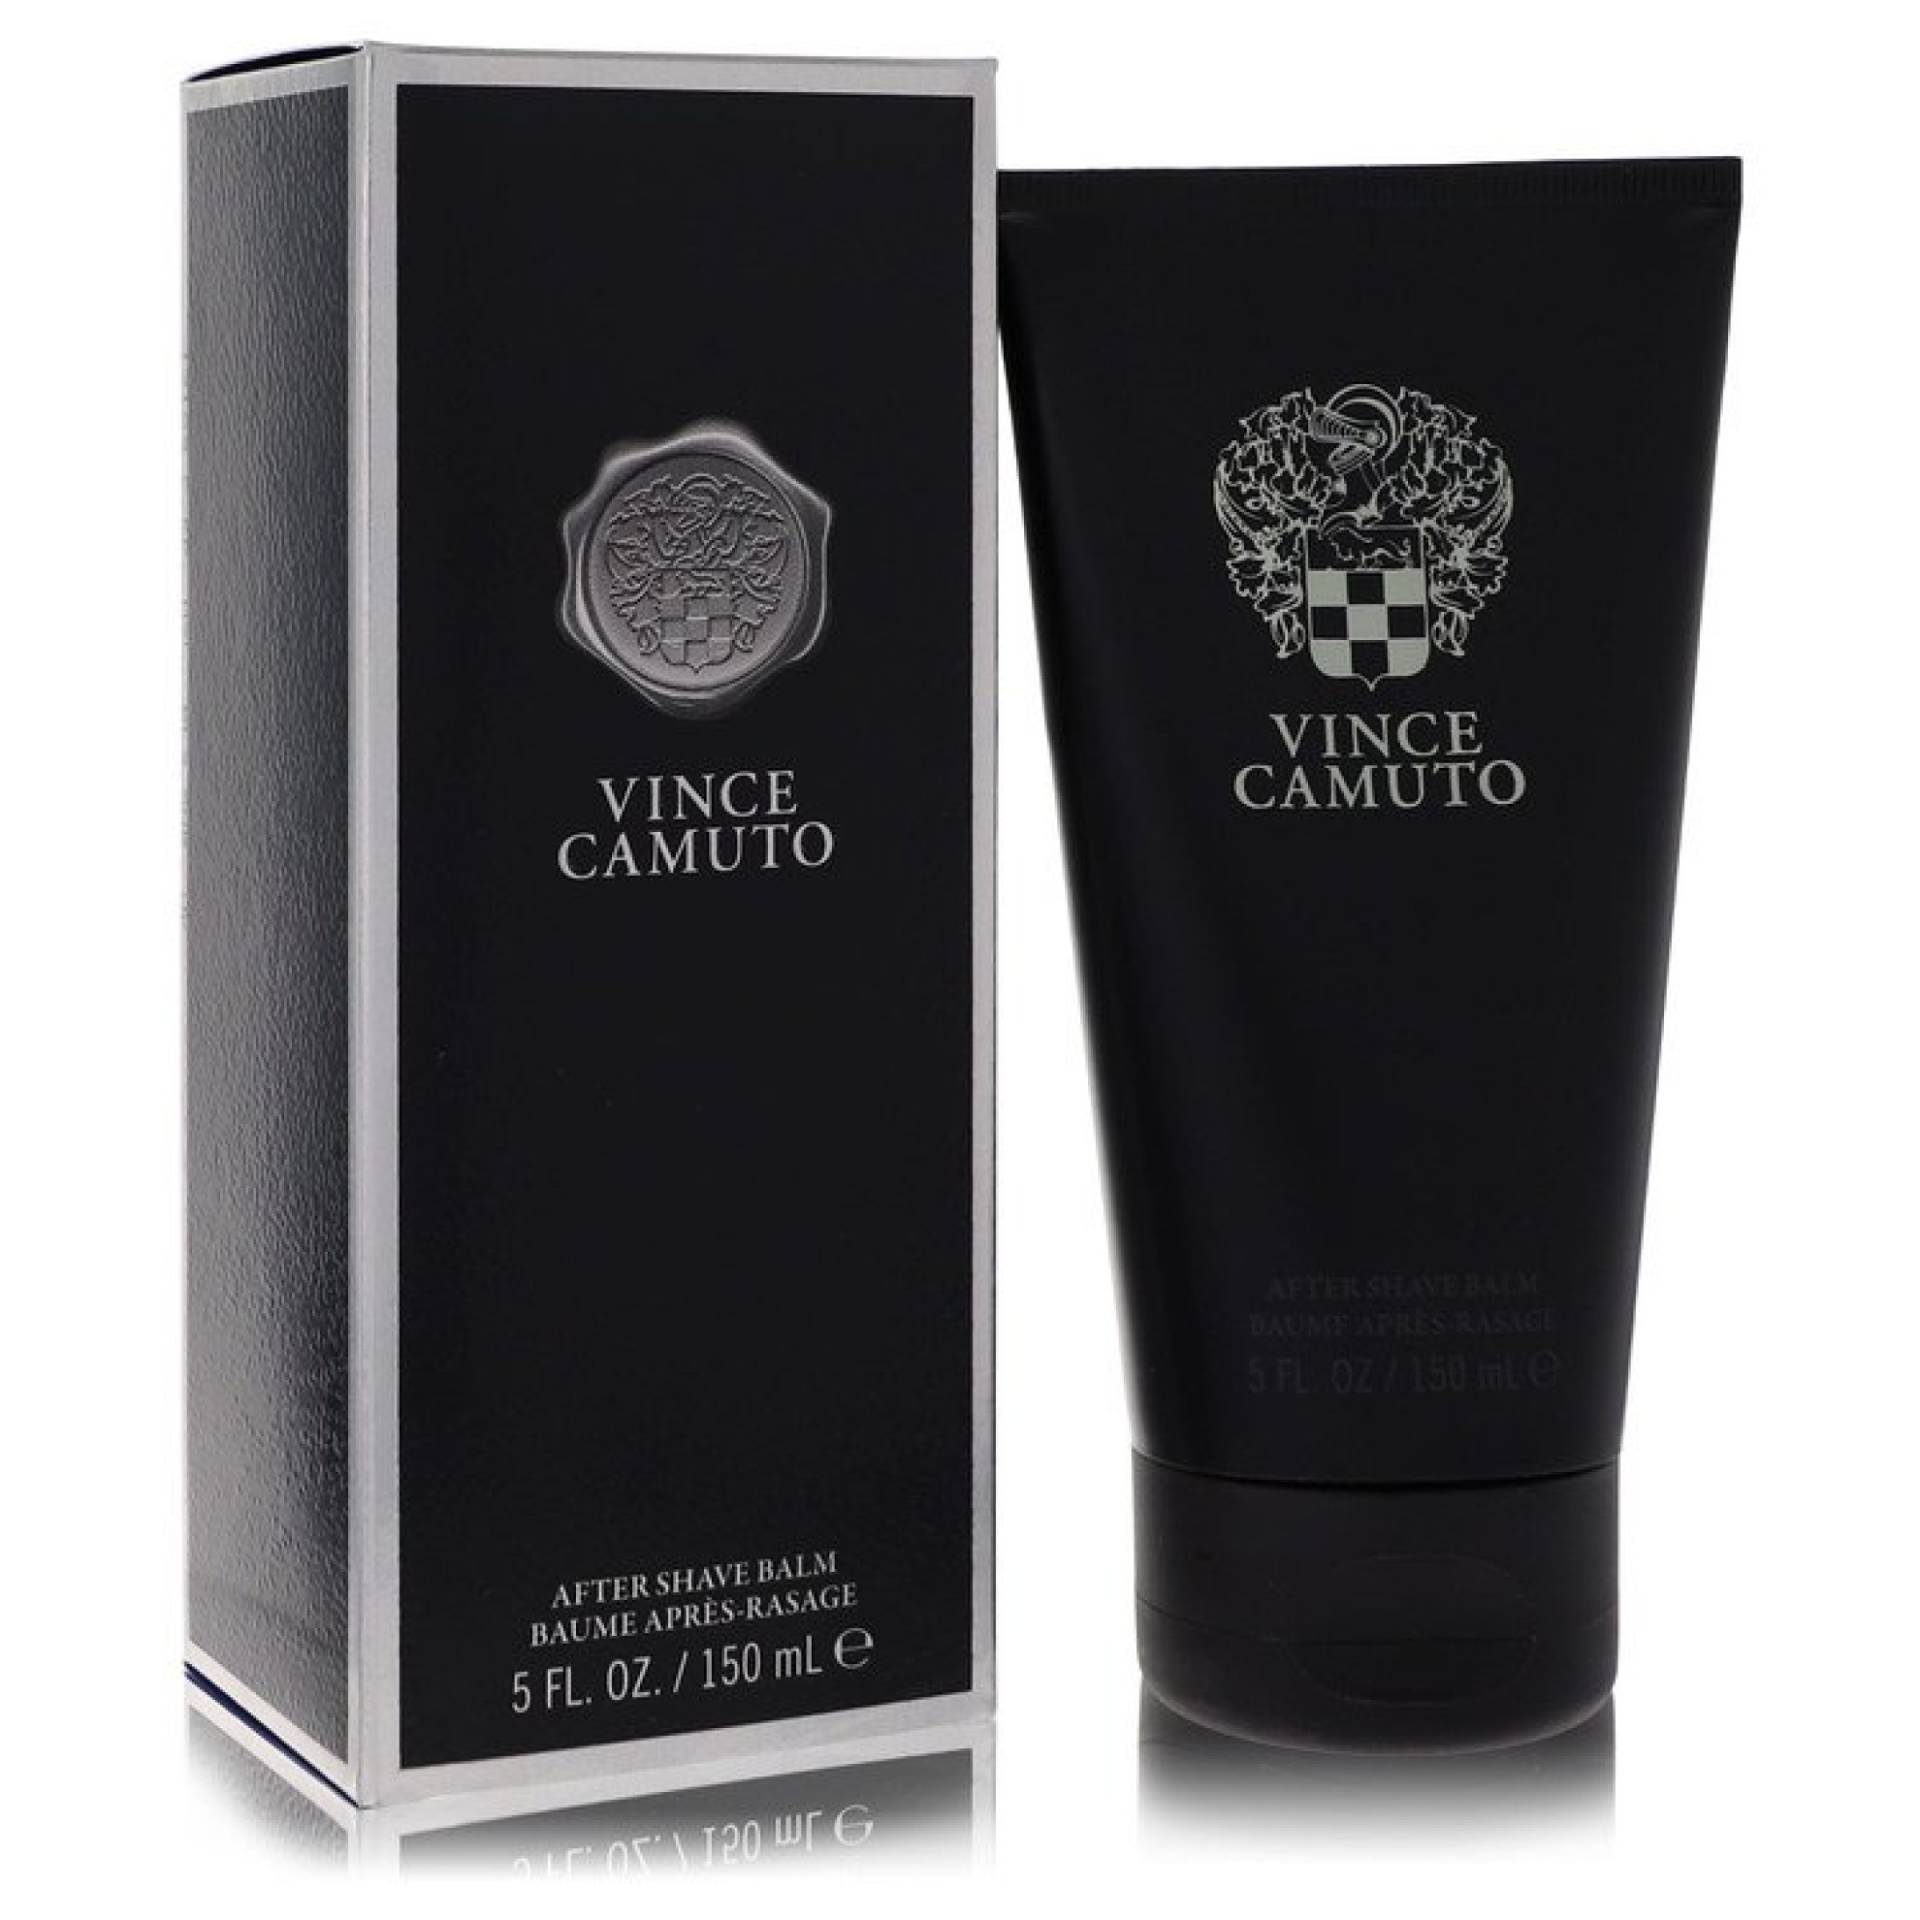 Vince Camuto After Shave Balm 150 ml von Vince Camuto